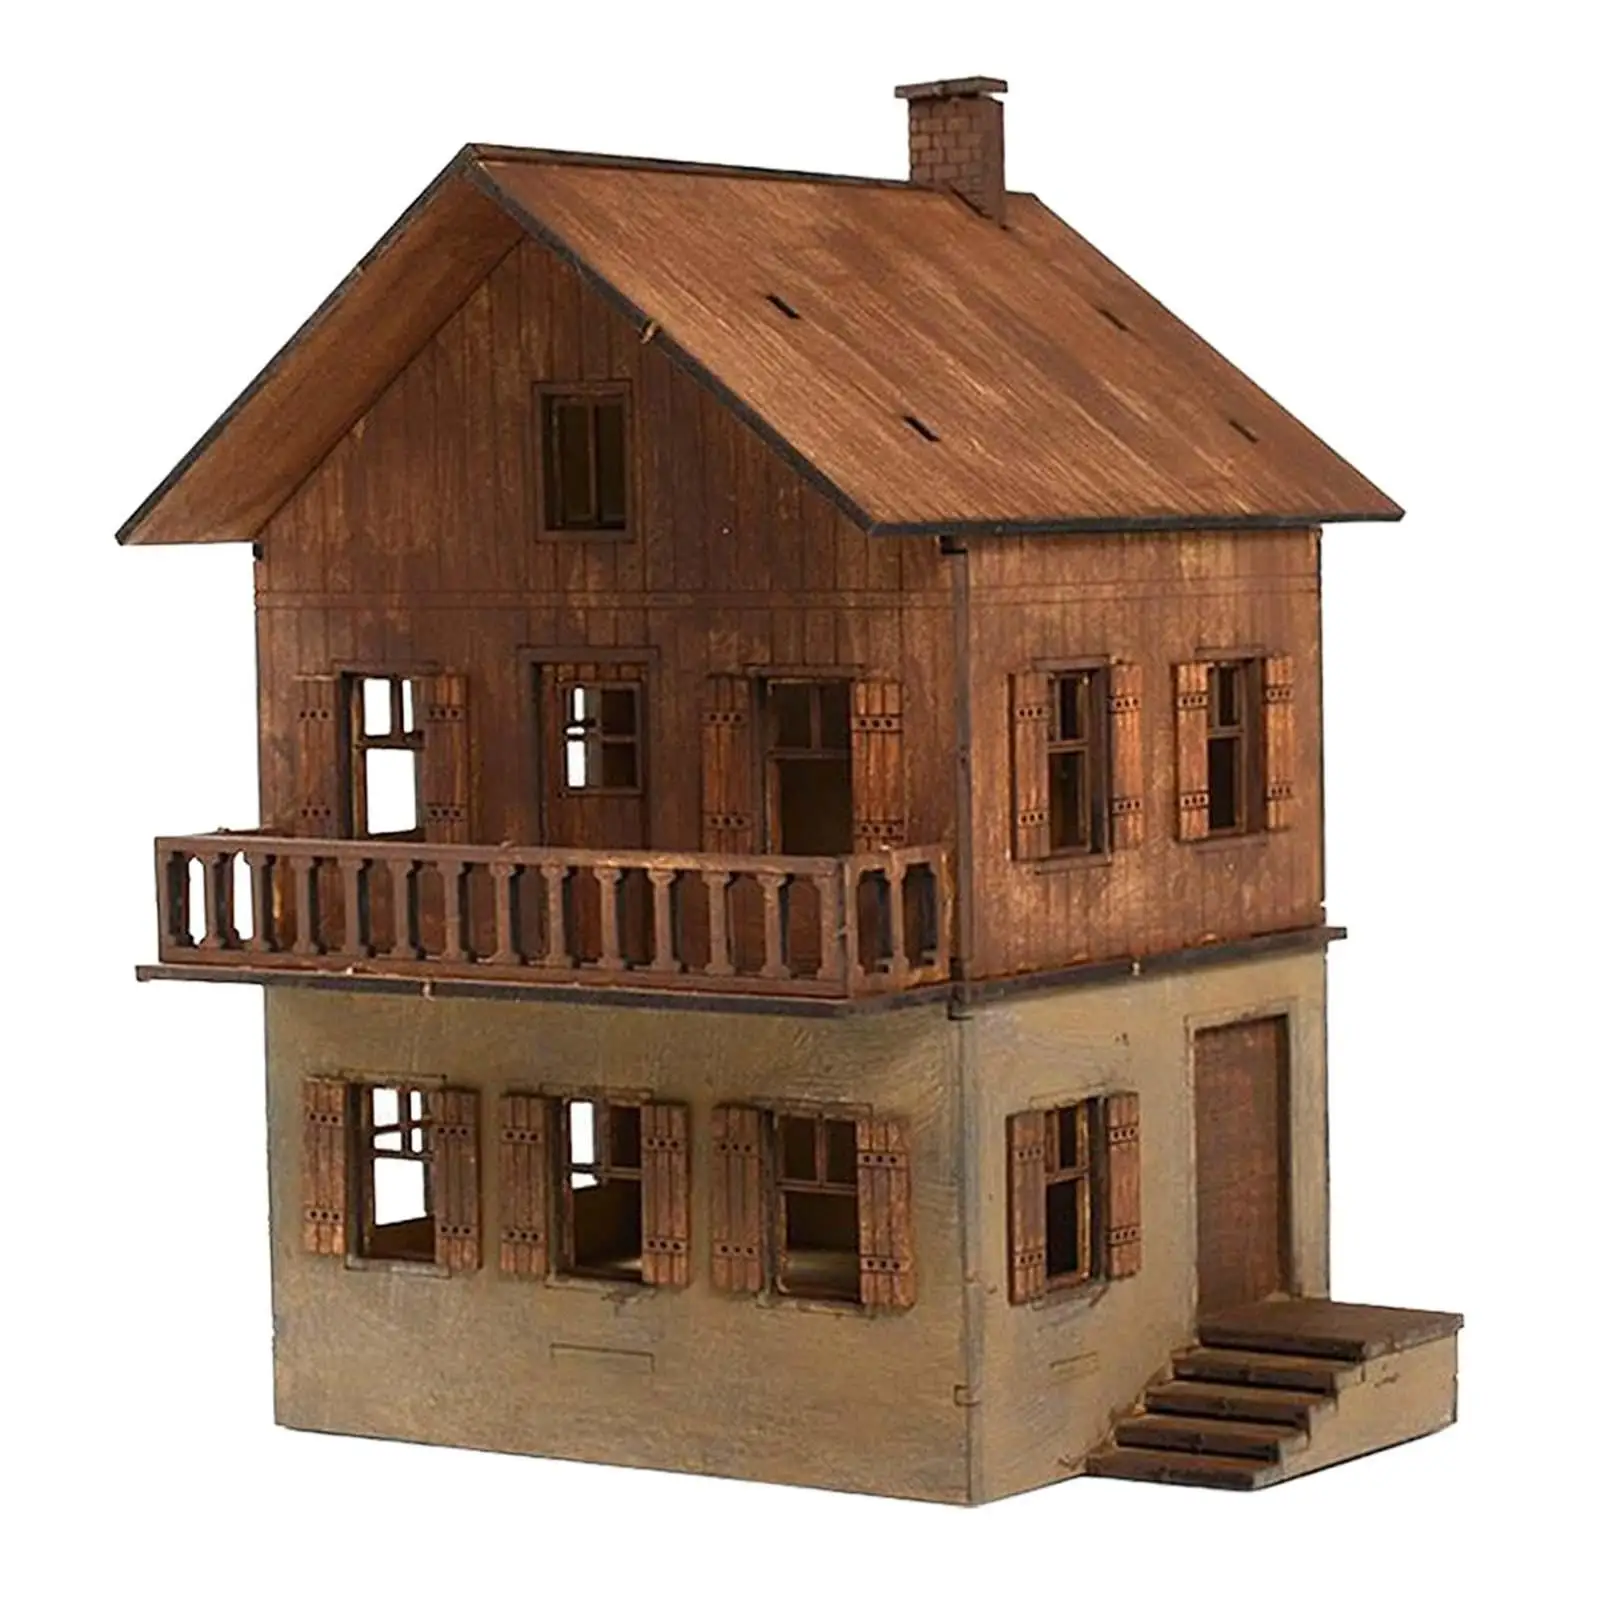 DIY Wooden House Assemble Educational Toys Handmade Wooden Model Kits House Diorama Layout Micro Landscapes Decor Scenery Layout